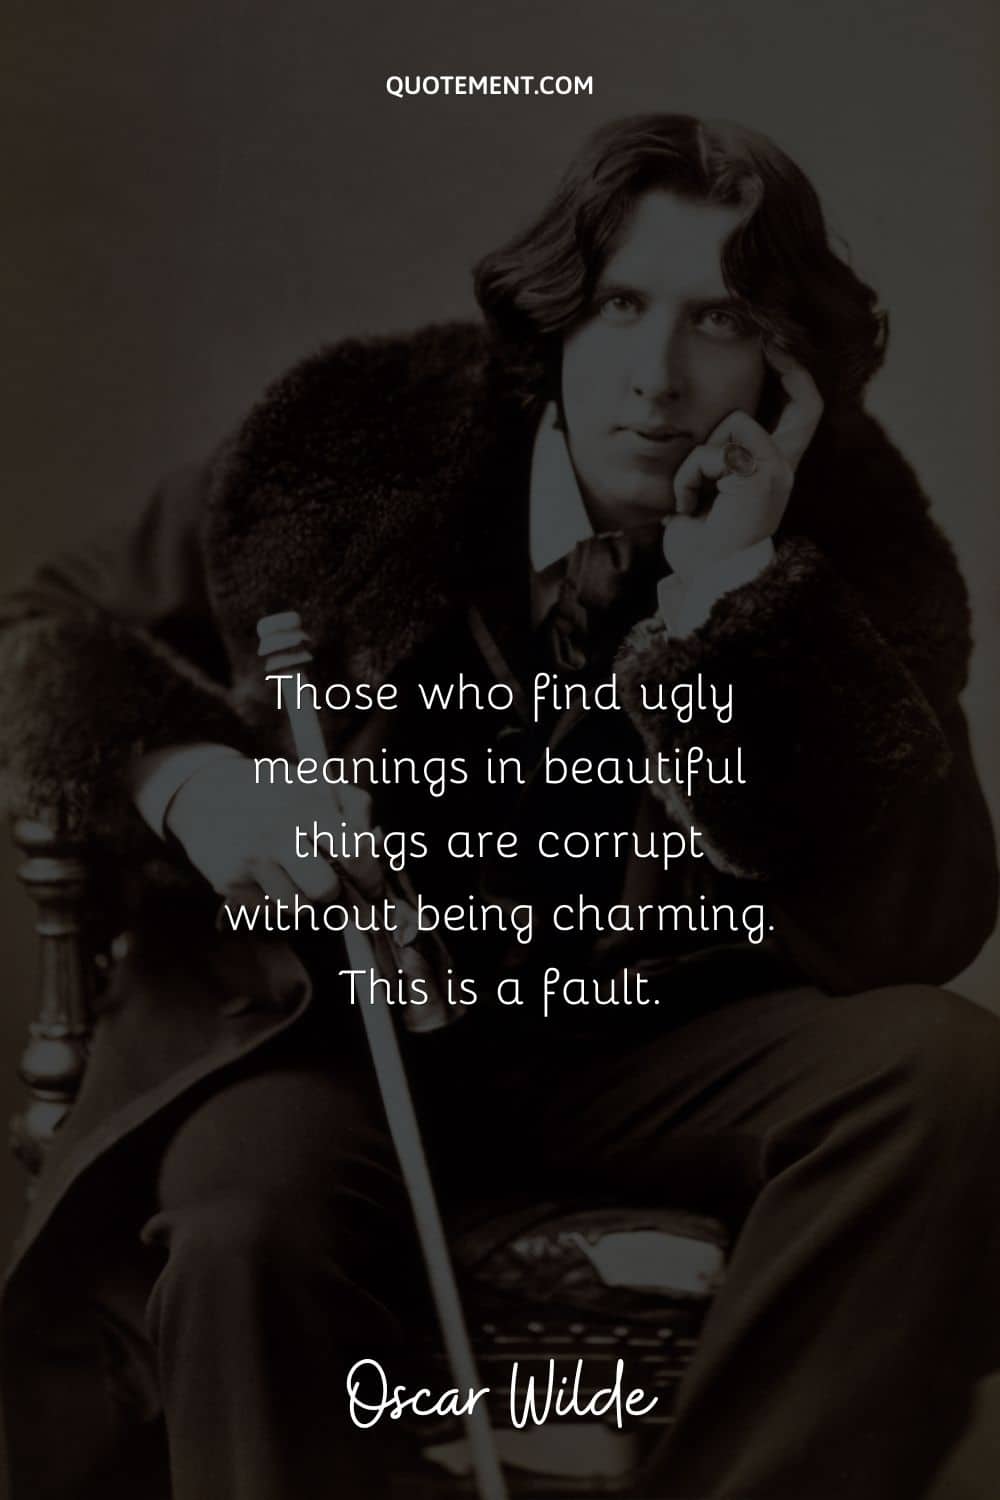 “Those who find ugly meanings in beautiful things are corrupt without being charming. This is a fault.” ― Oscar Wilde (The Picture of Dorian Gray)